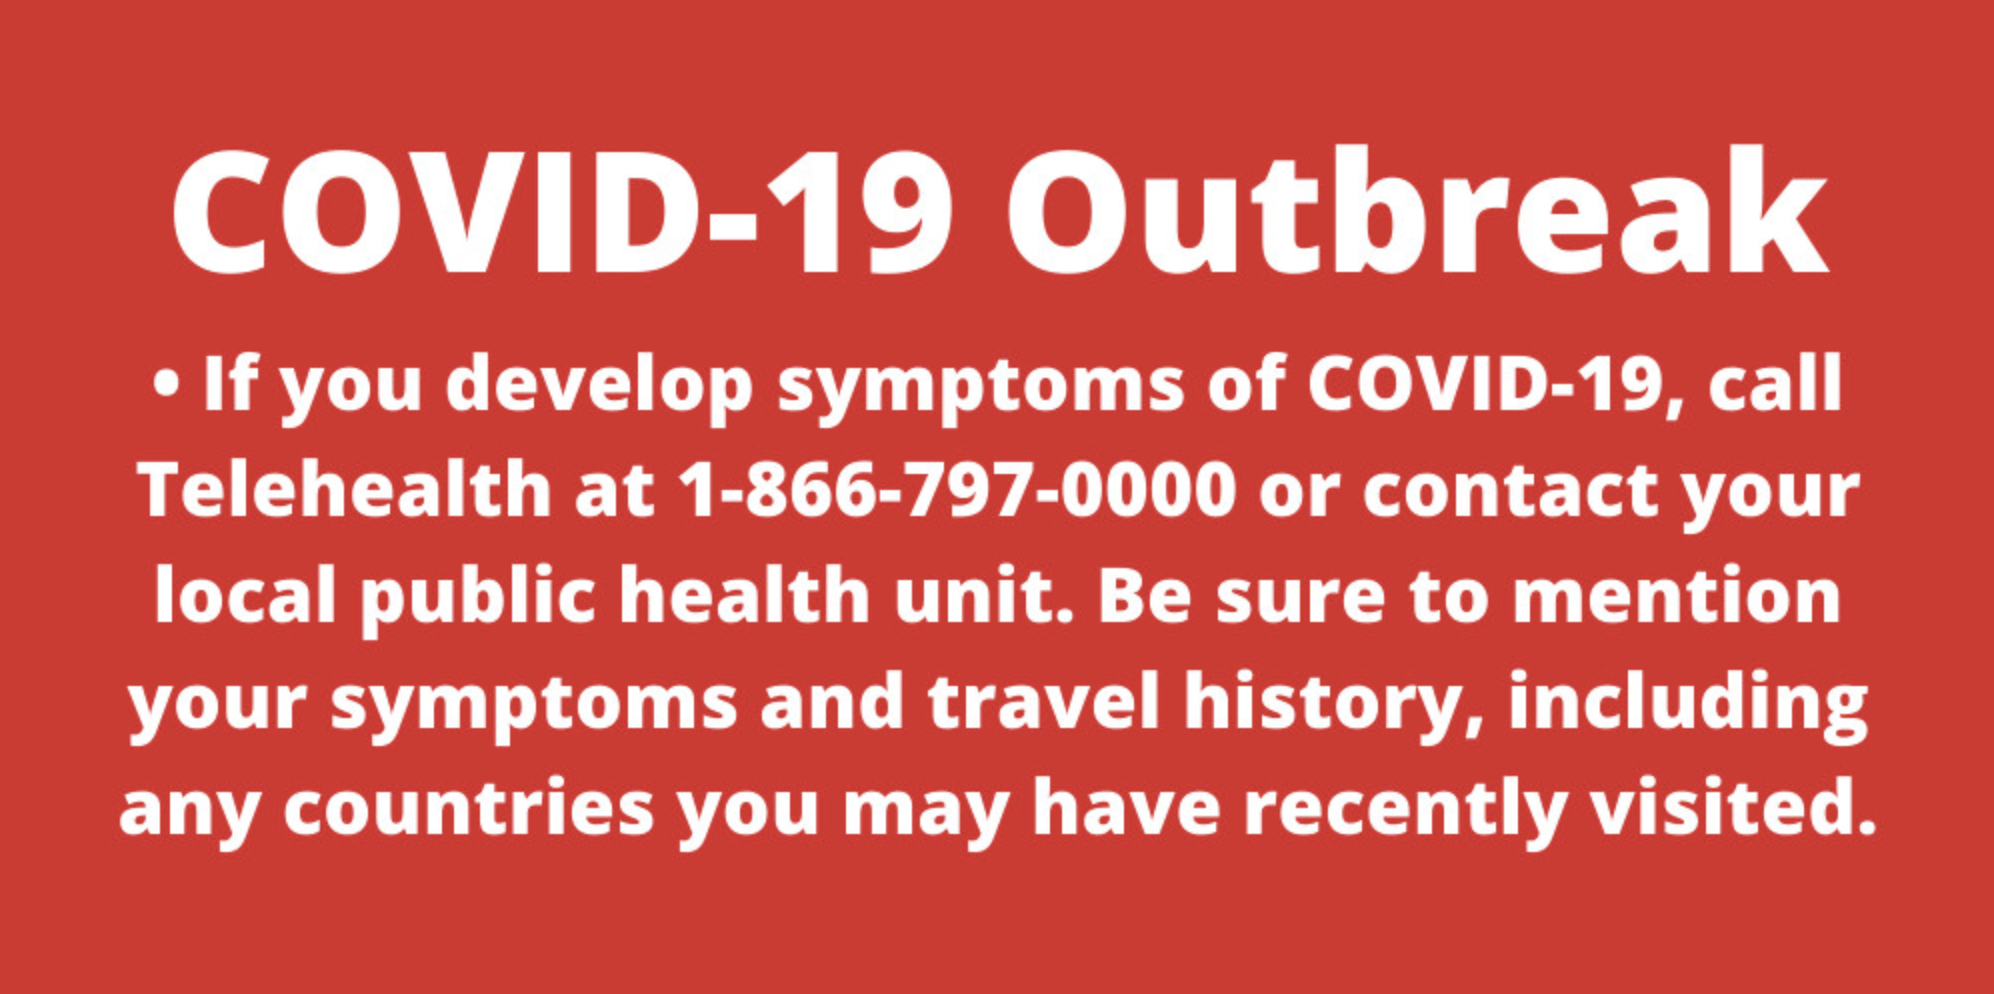 Covid 19 Outbreak - If you develop symptoms of COVID 19 call telehealth at 1-866-797-0000 or contact your local public health unit. Be sure to mention your symptoms and travel history, including any countries you may have recently visited.